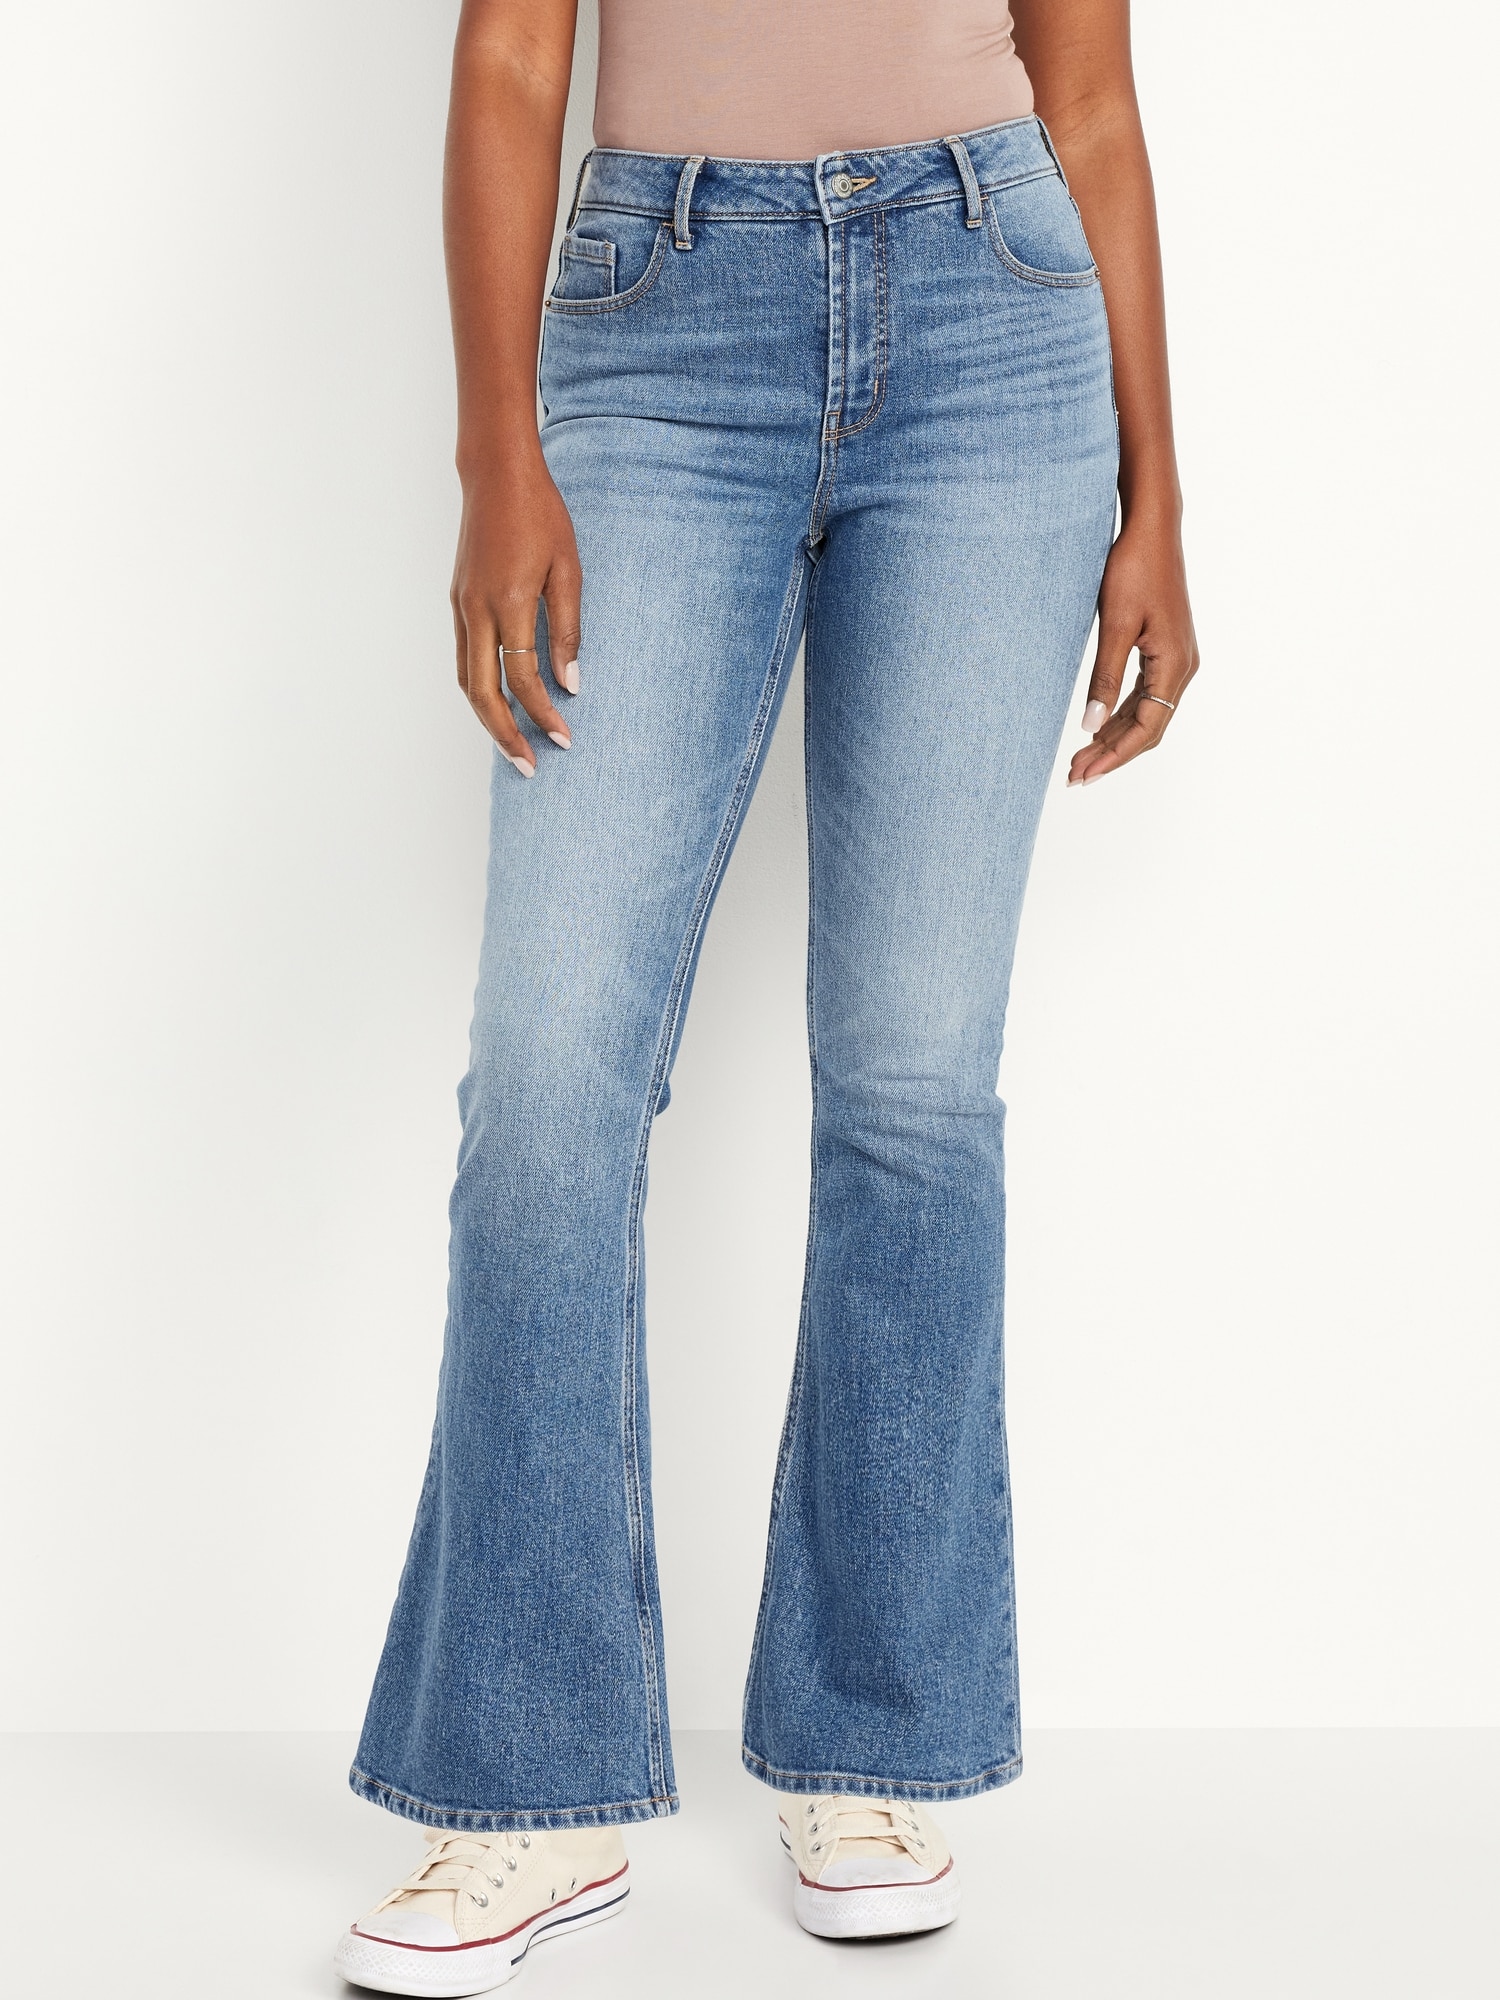 Flare Jeans for Petite Women